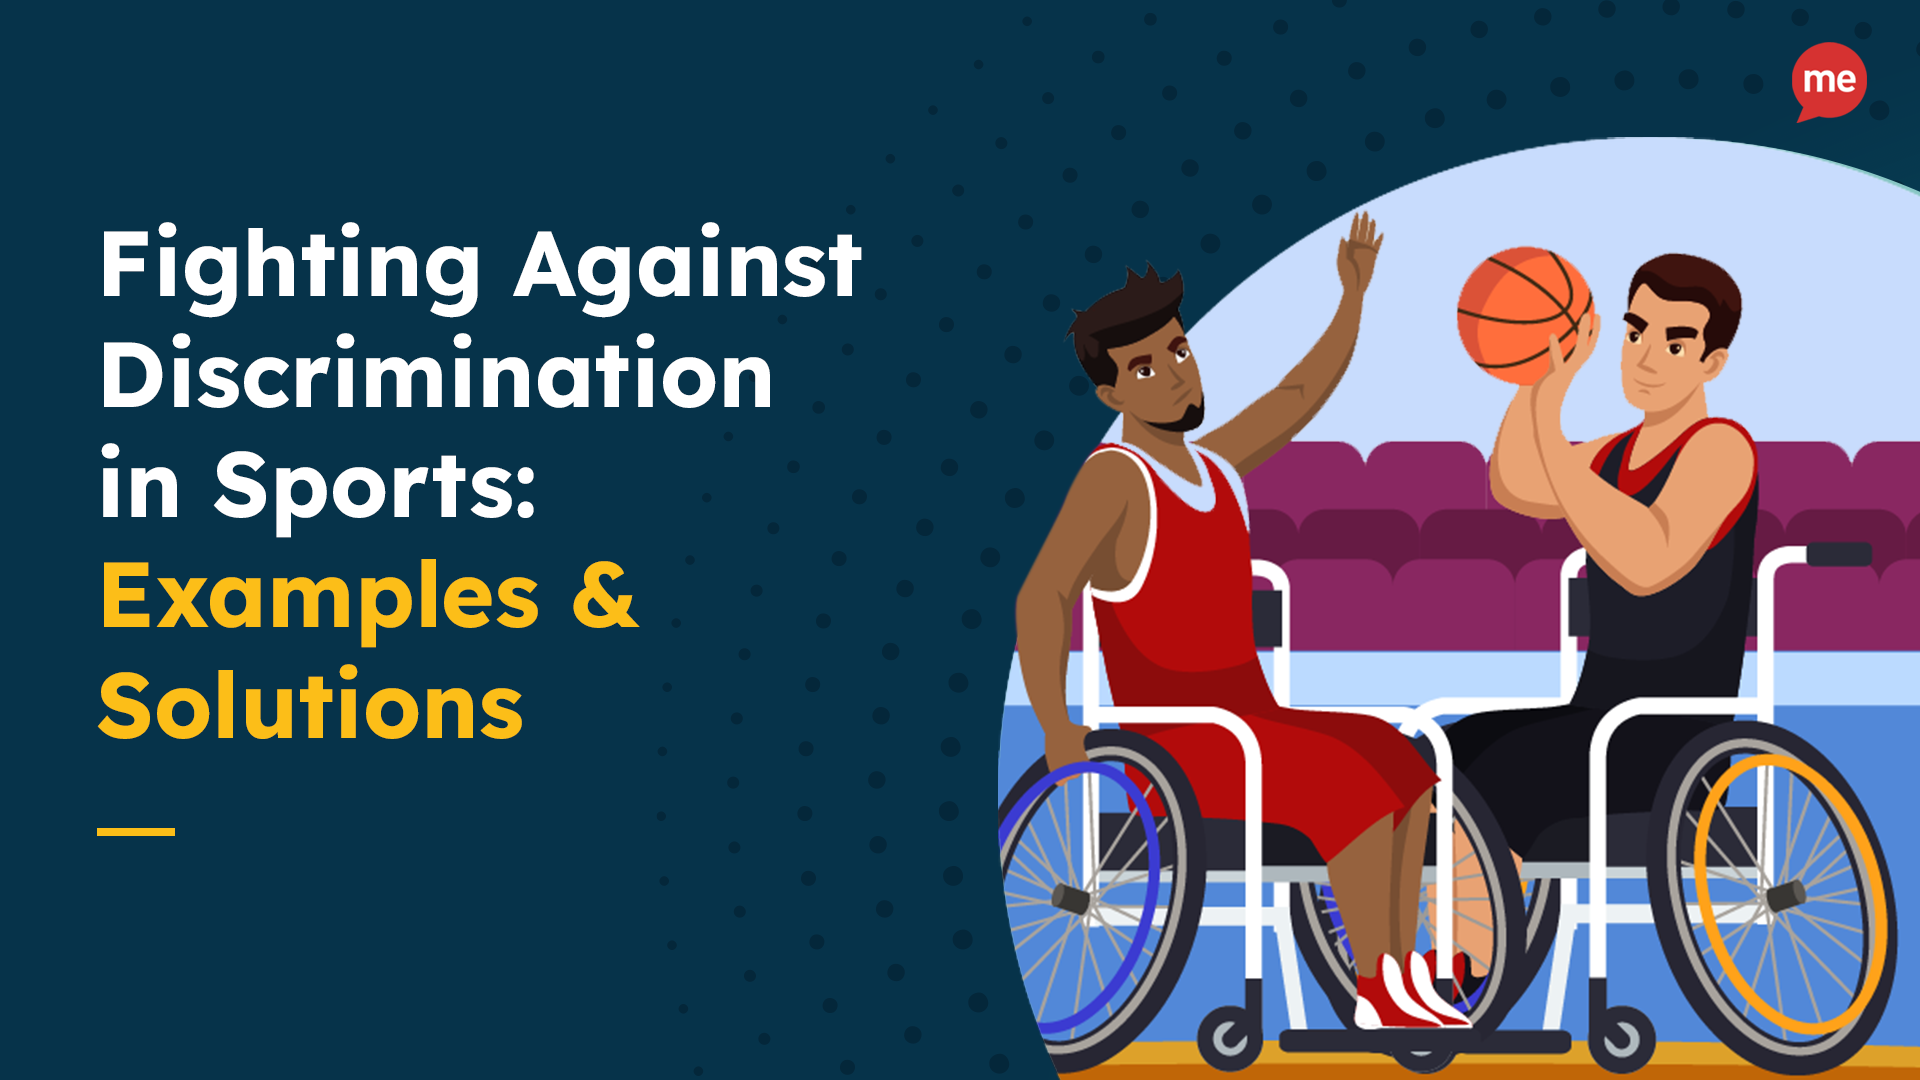 Fighting Against Discrimination in sports solutions and examples